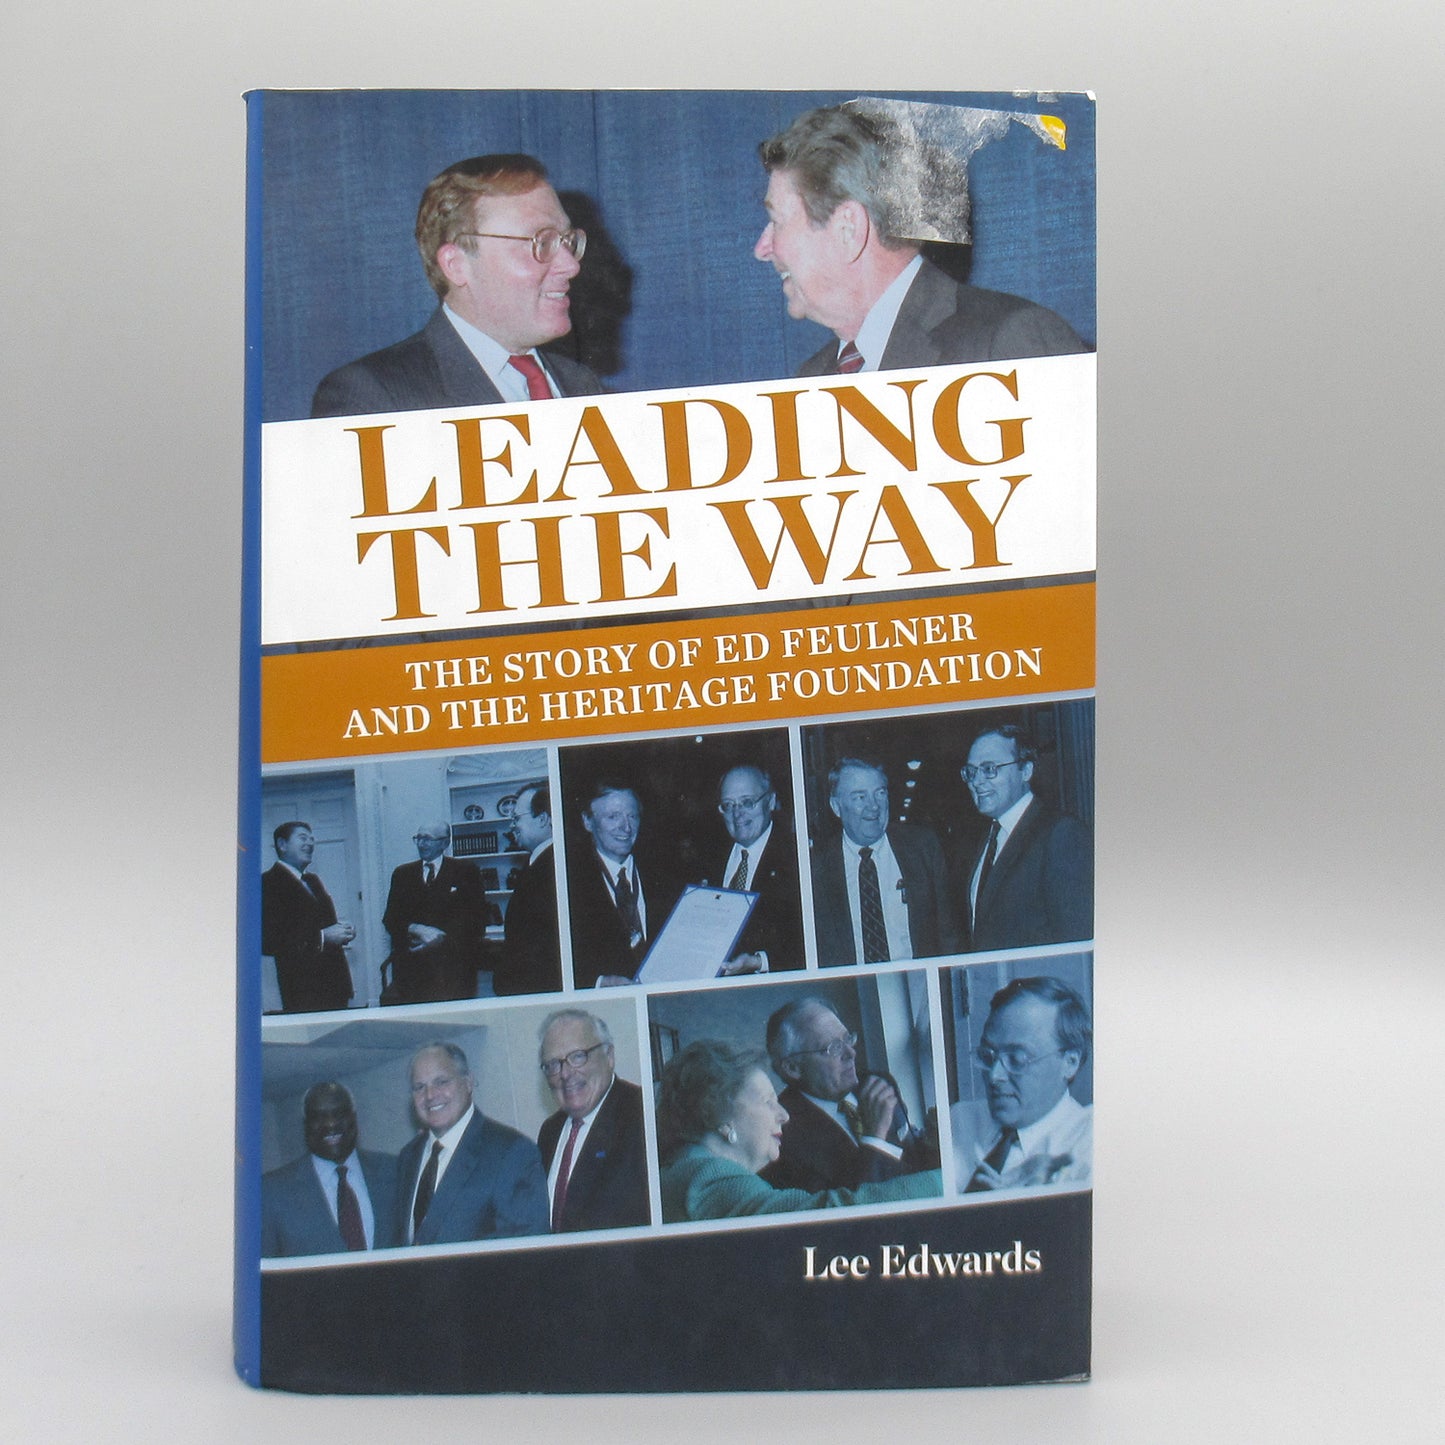 Leading the Way: The Story of Ed Feulner and the Heritage Foundation***